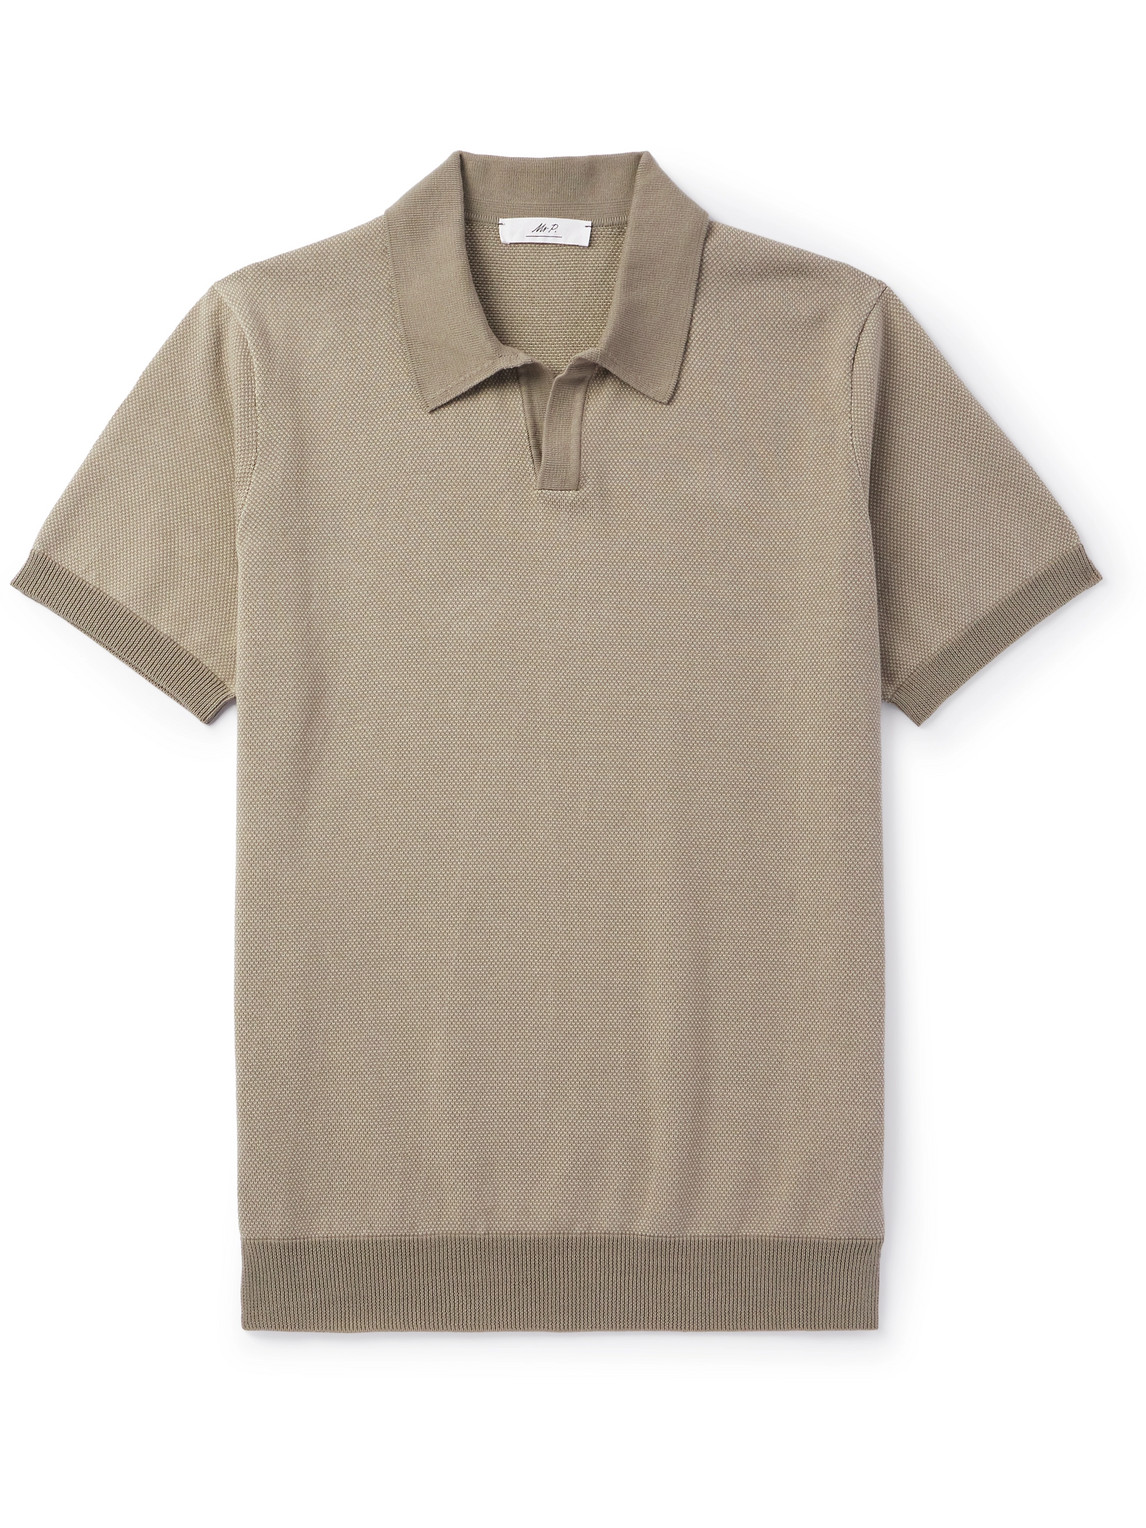 Mr P Honeycomb-knit Cotton Polo Shirt In Neutrals